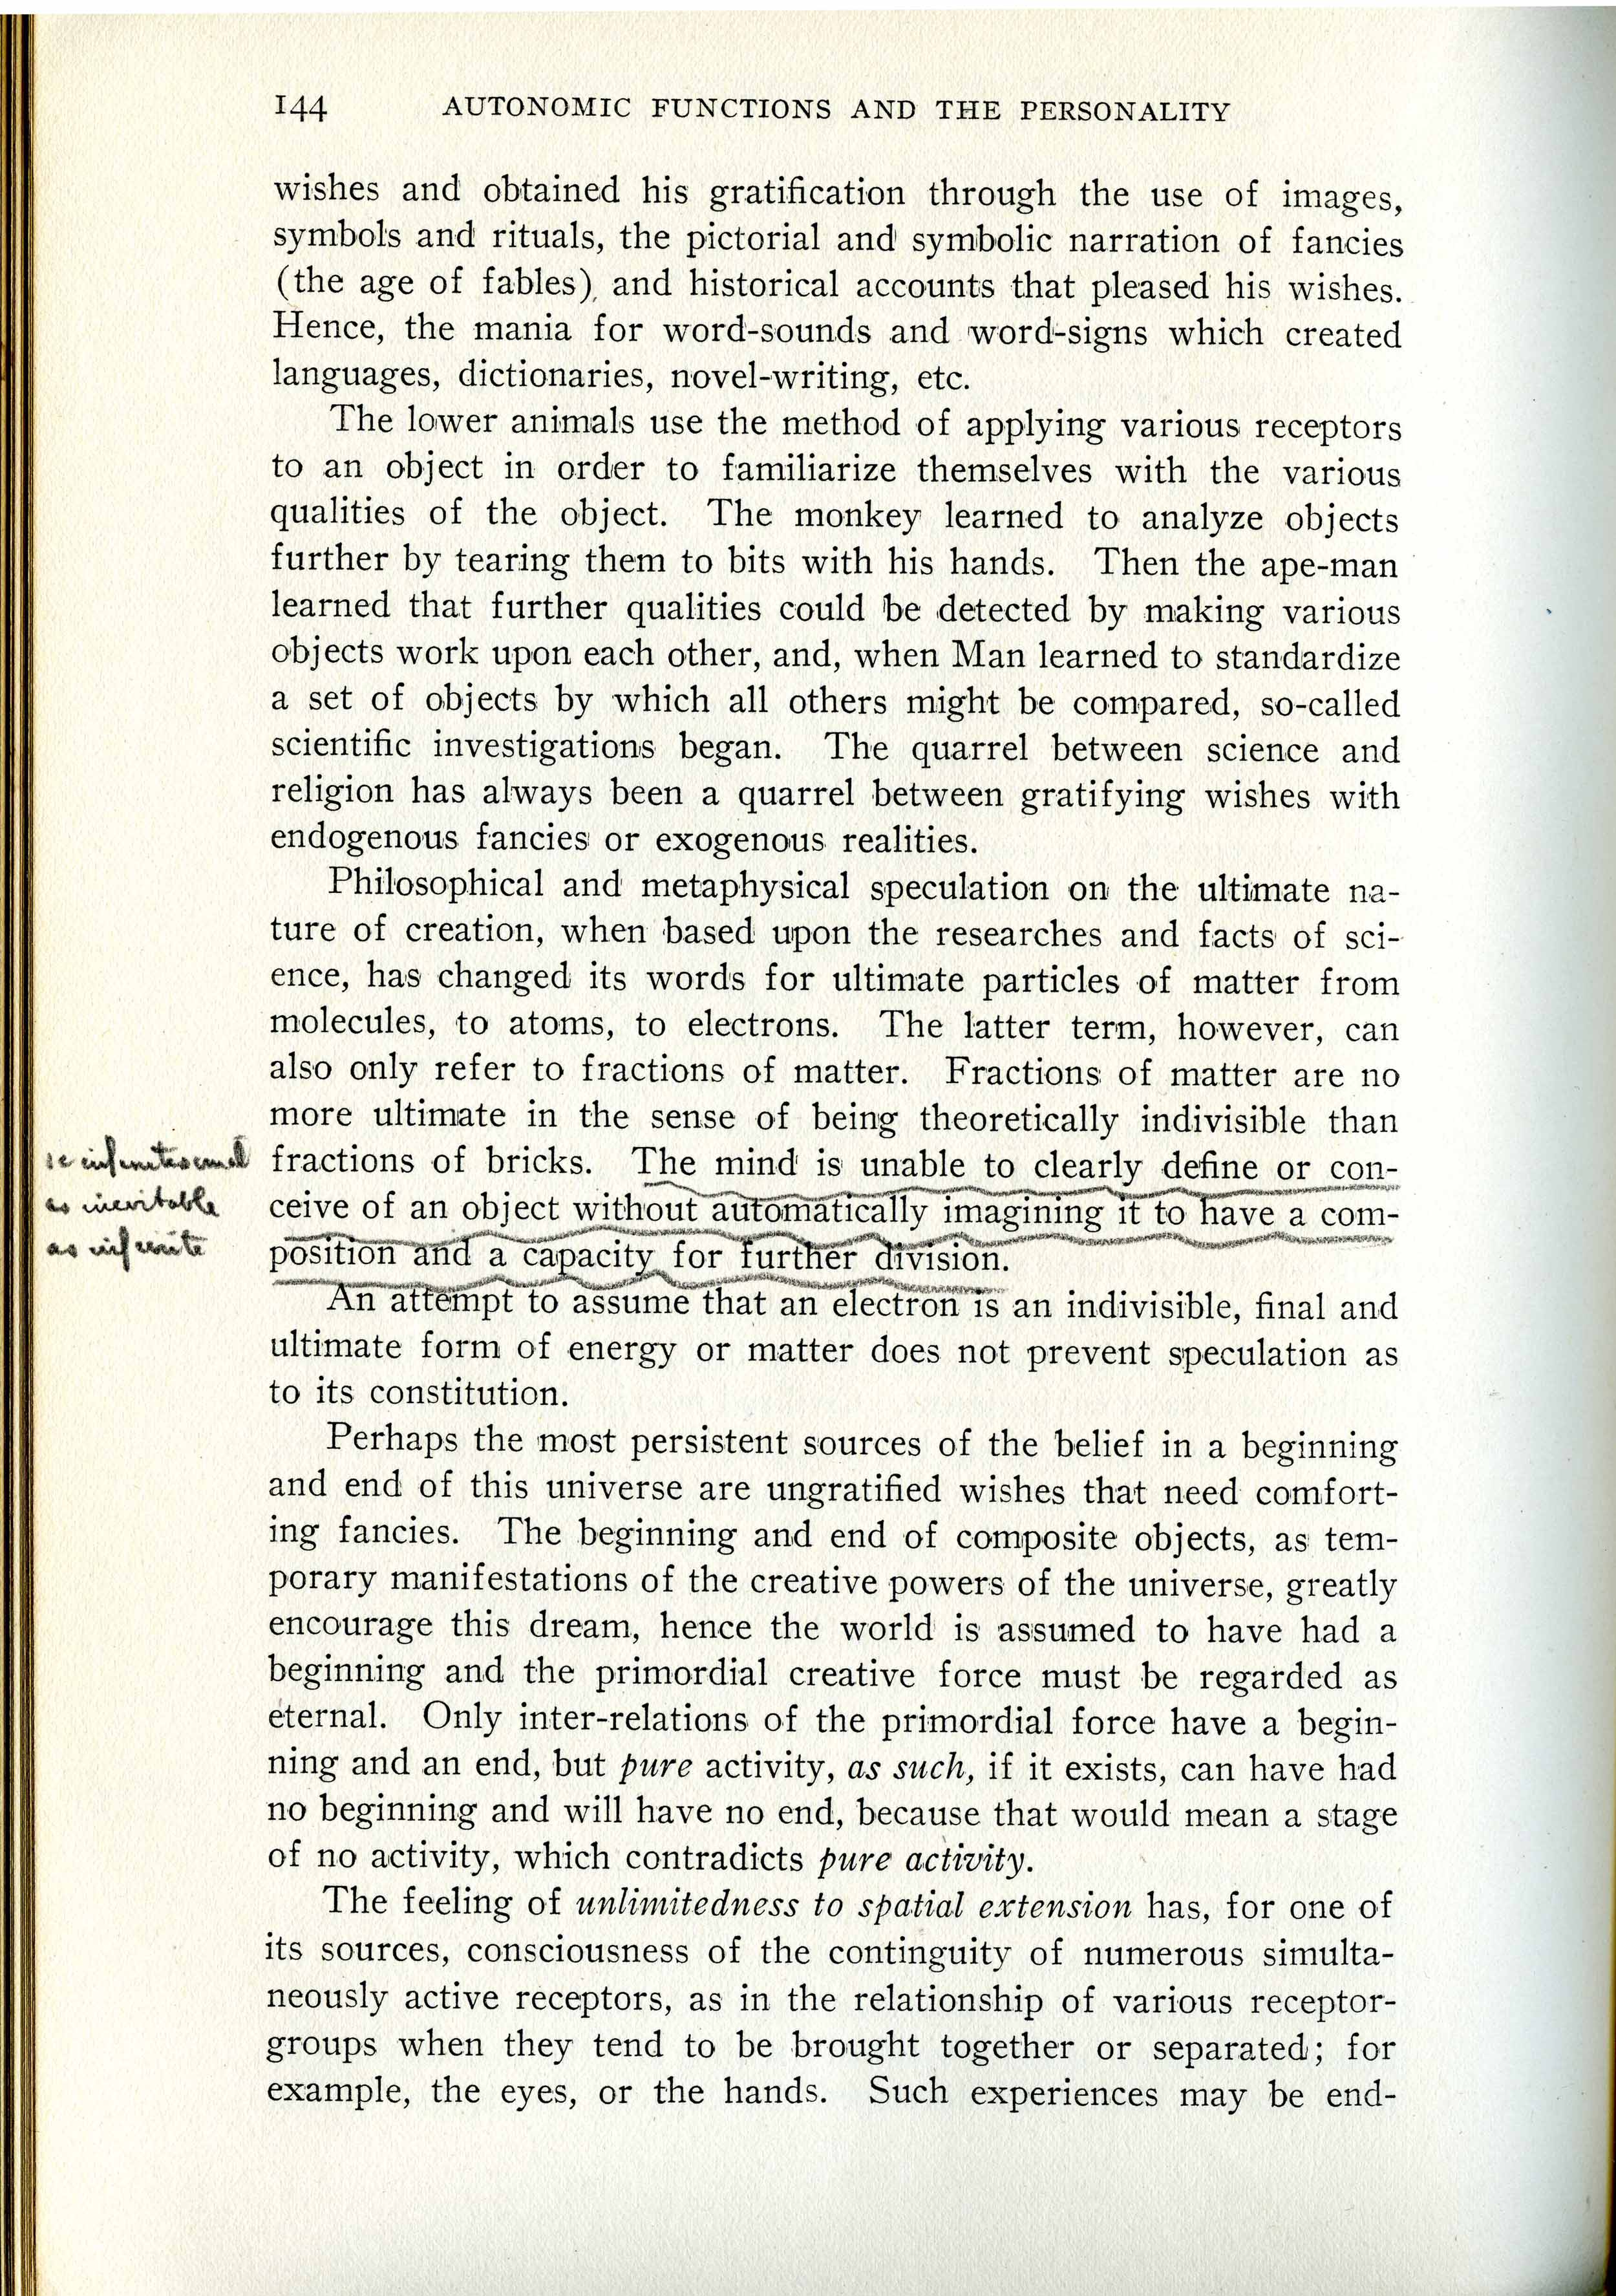 Berne's annotations in "The Autonomic Functions and the Personality"